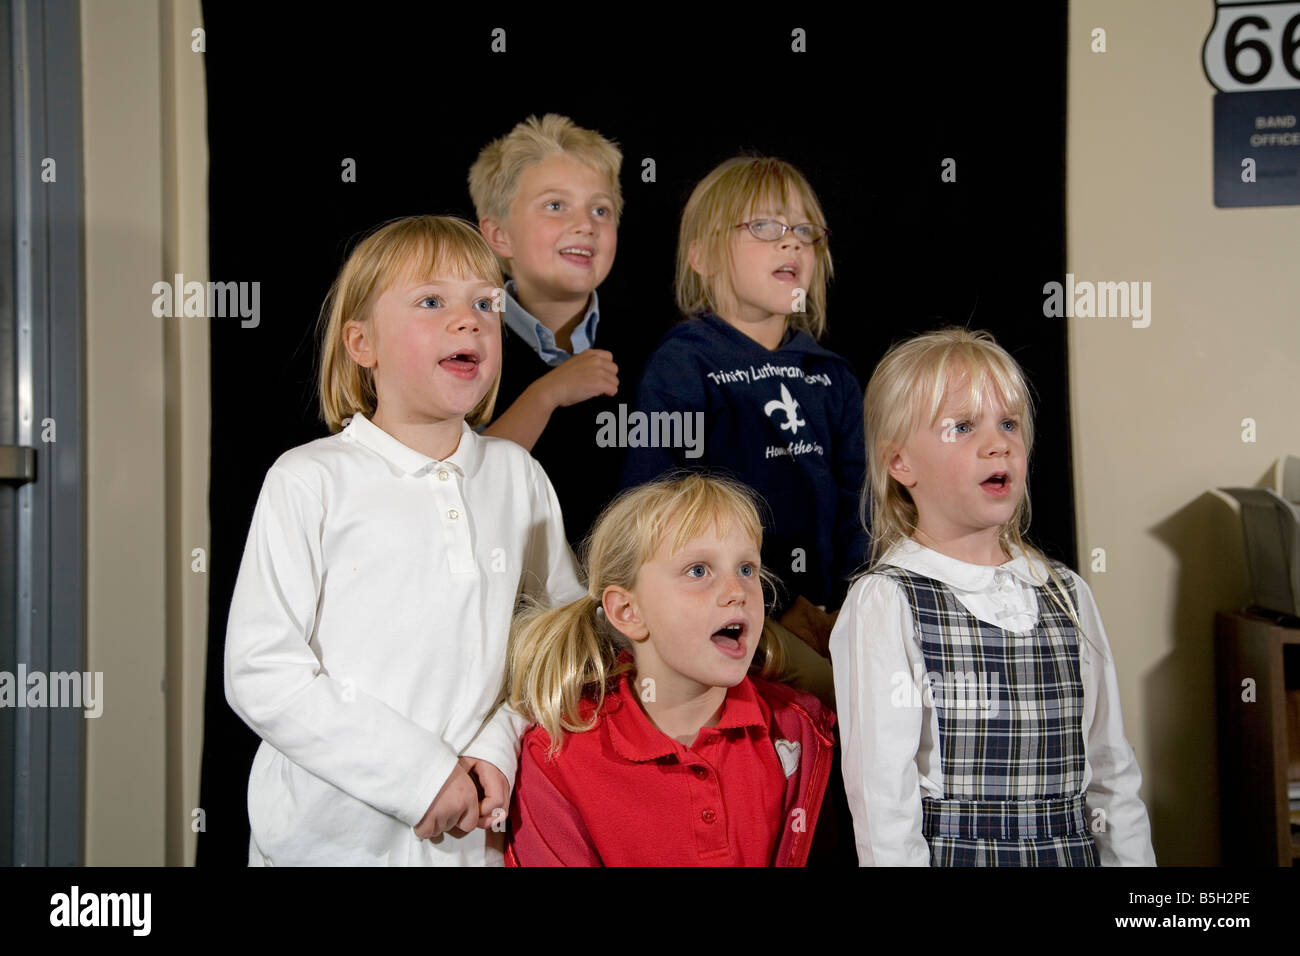 USA AMERICA OREGON A children s choir sings an old folk song at a rehersal in Bend Oregon Stock Photo